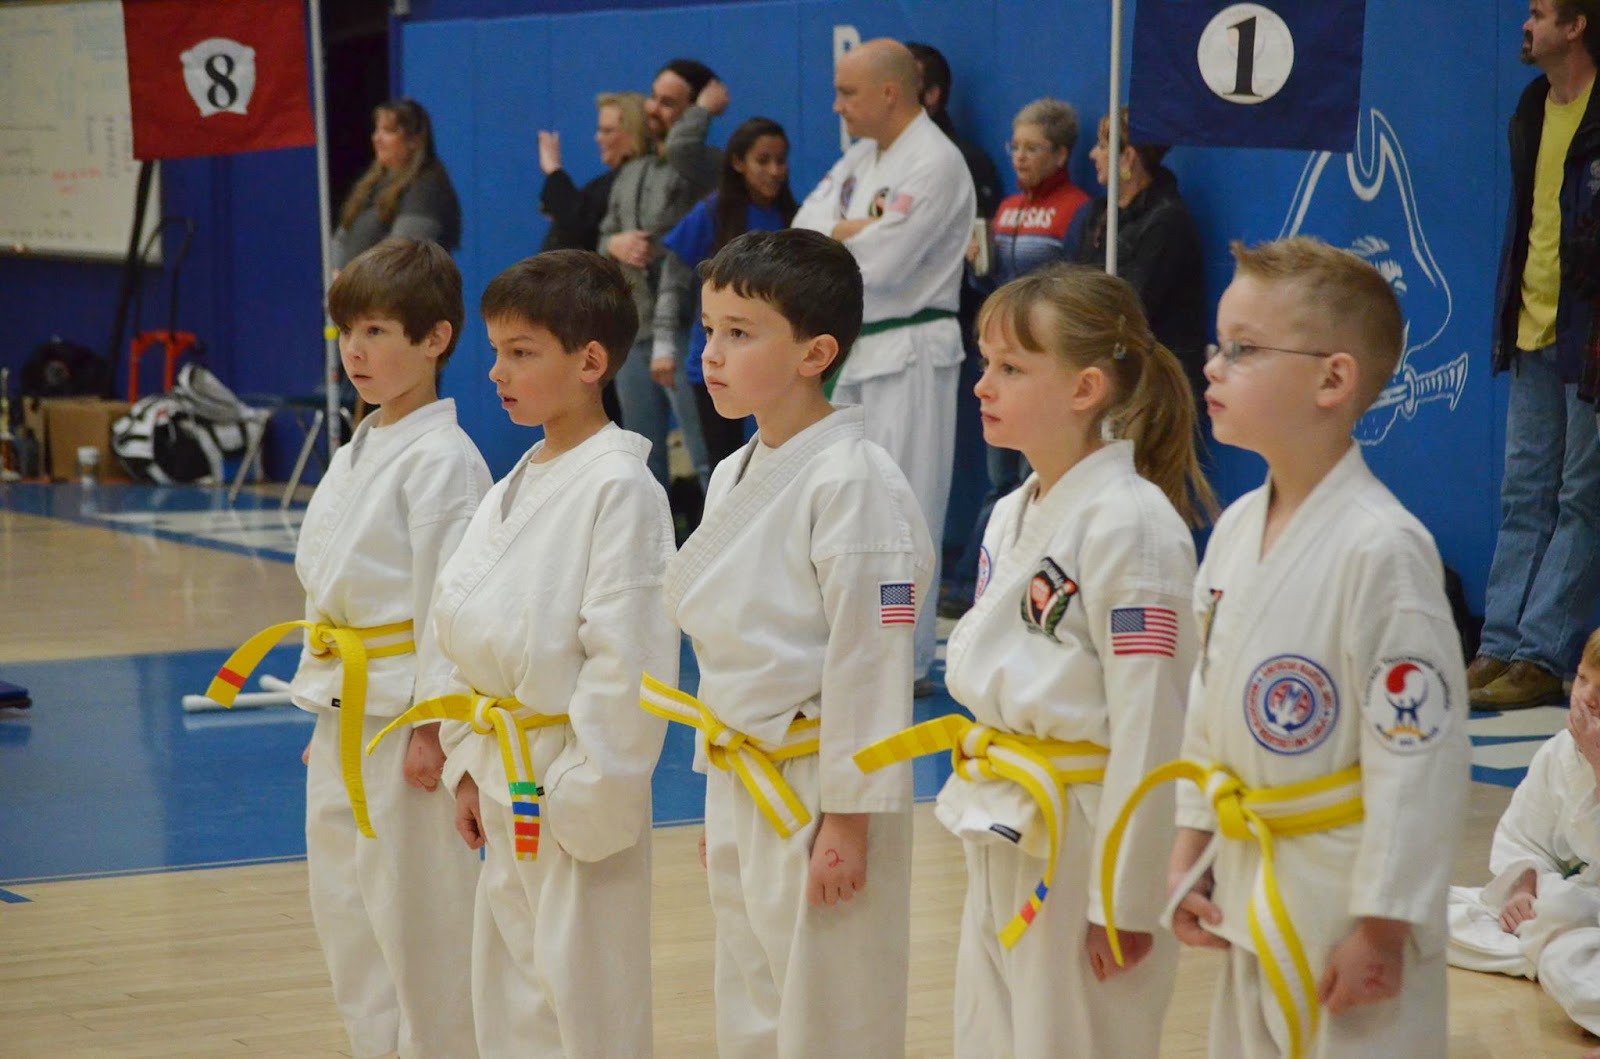 Martial arts students ready to compete at a tournament